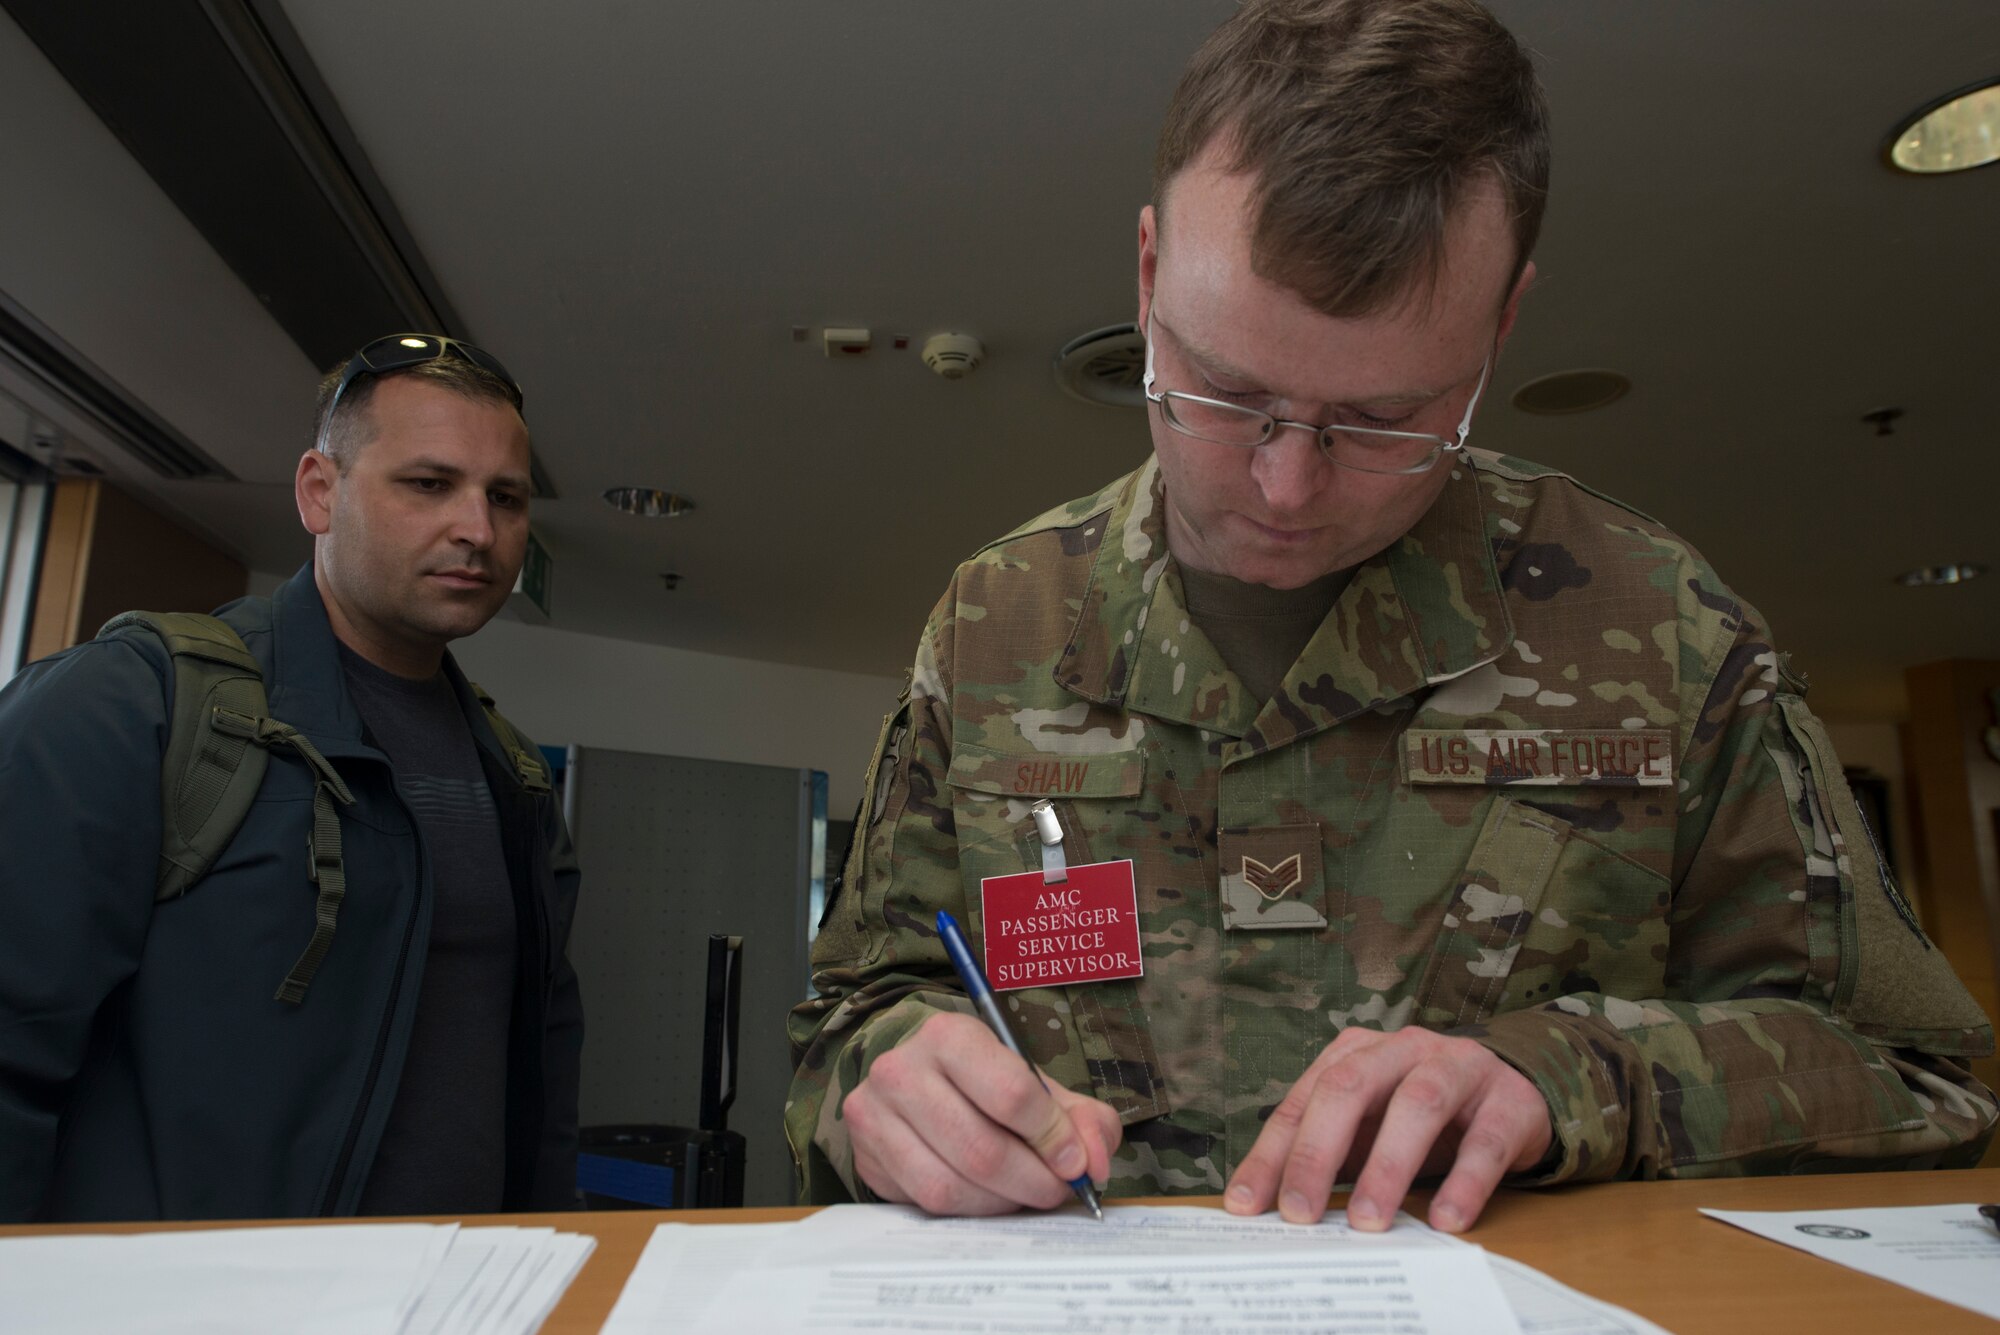 A picture of an Airman filing documents for a passenger.